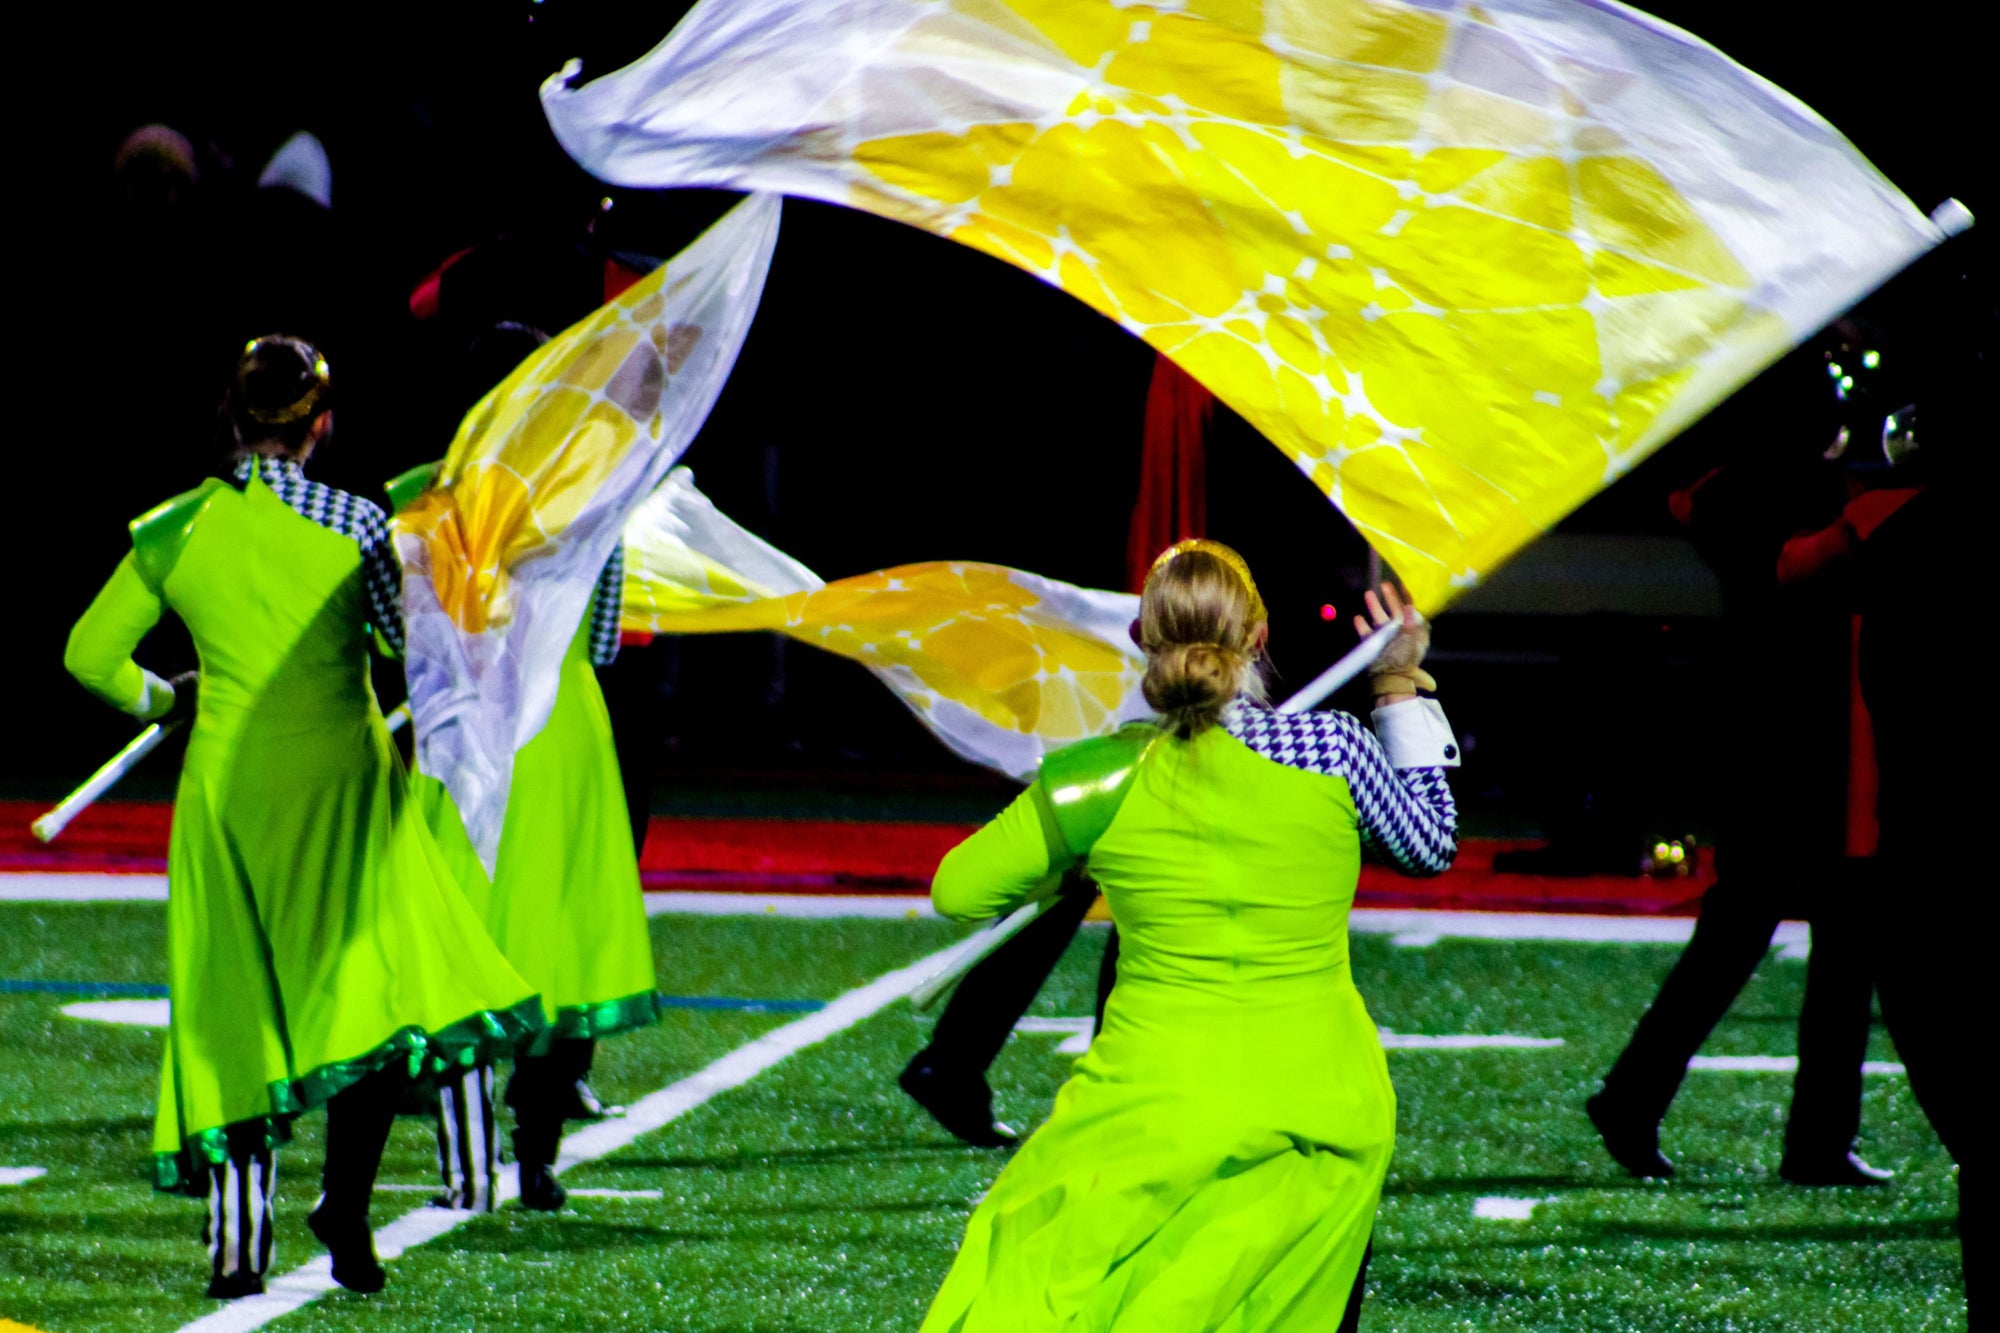 Colorful marching band flags waving in the air during a performance, adding vibrant energy to the event. Ideal for marching band enthusiasts and performers seeking dynamic visuals